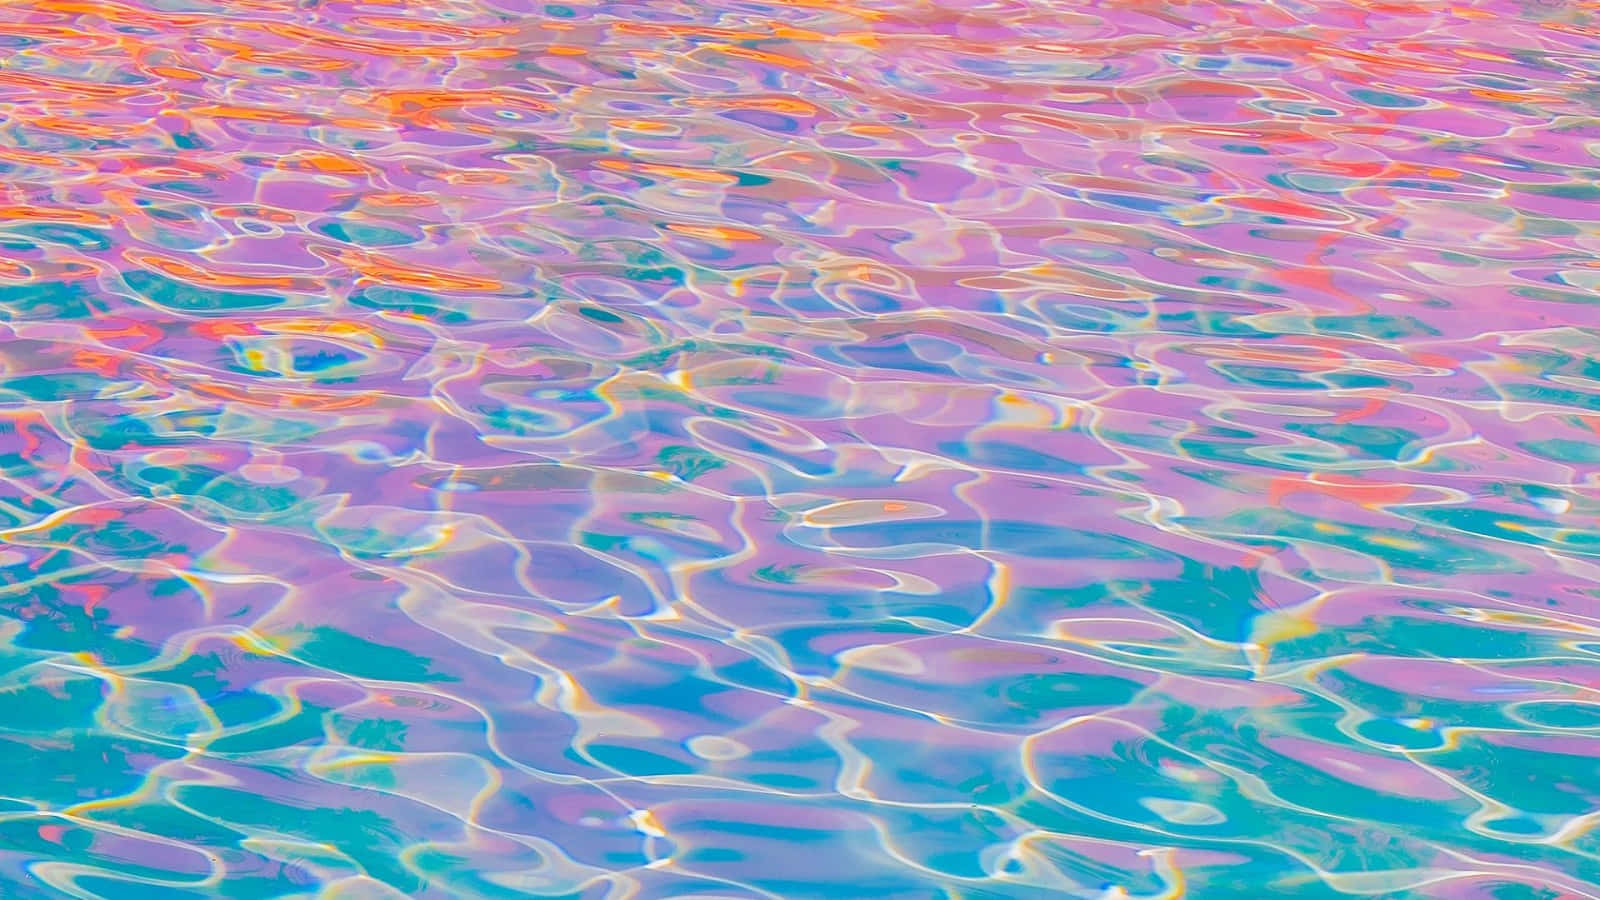 Psychedelic Water Ripples Background Wallpaper